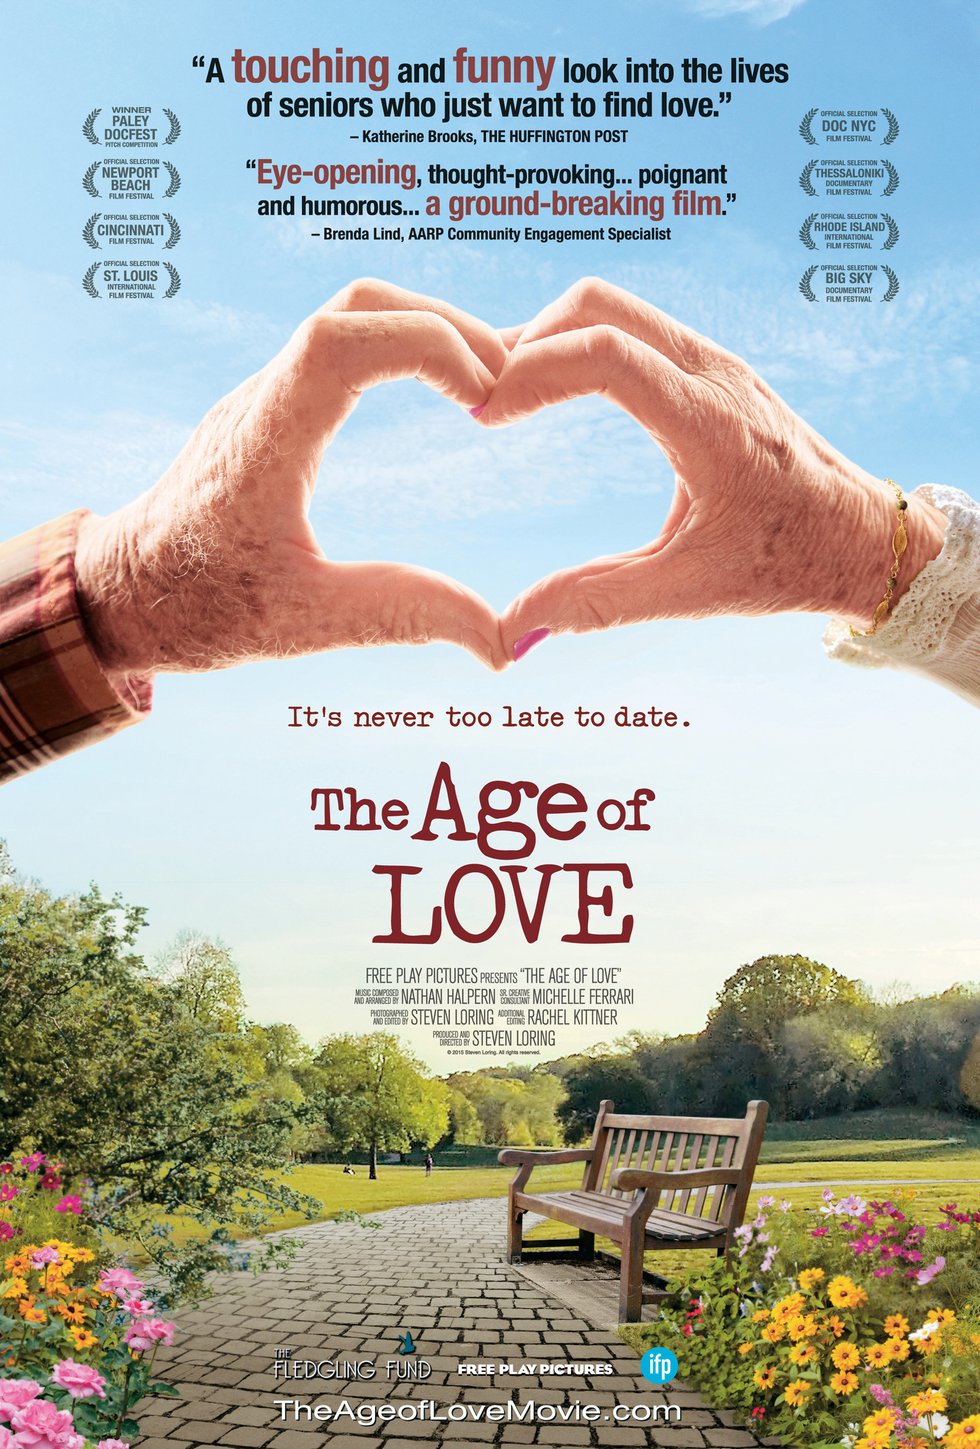 The Age of Love Documentary Poster